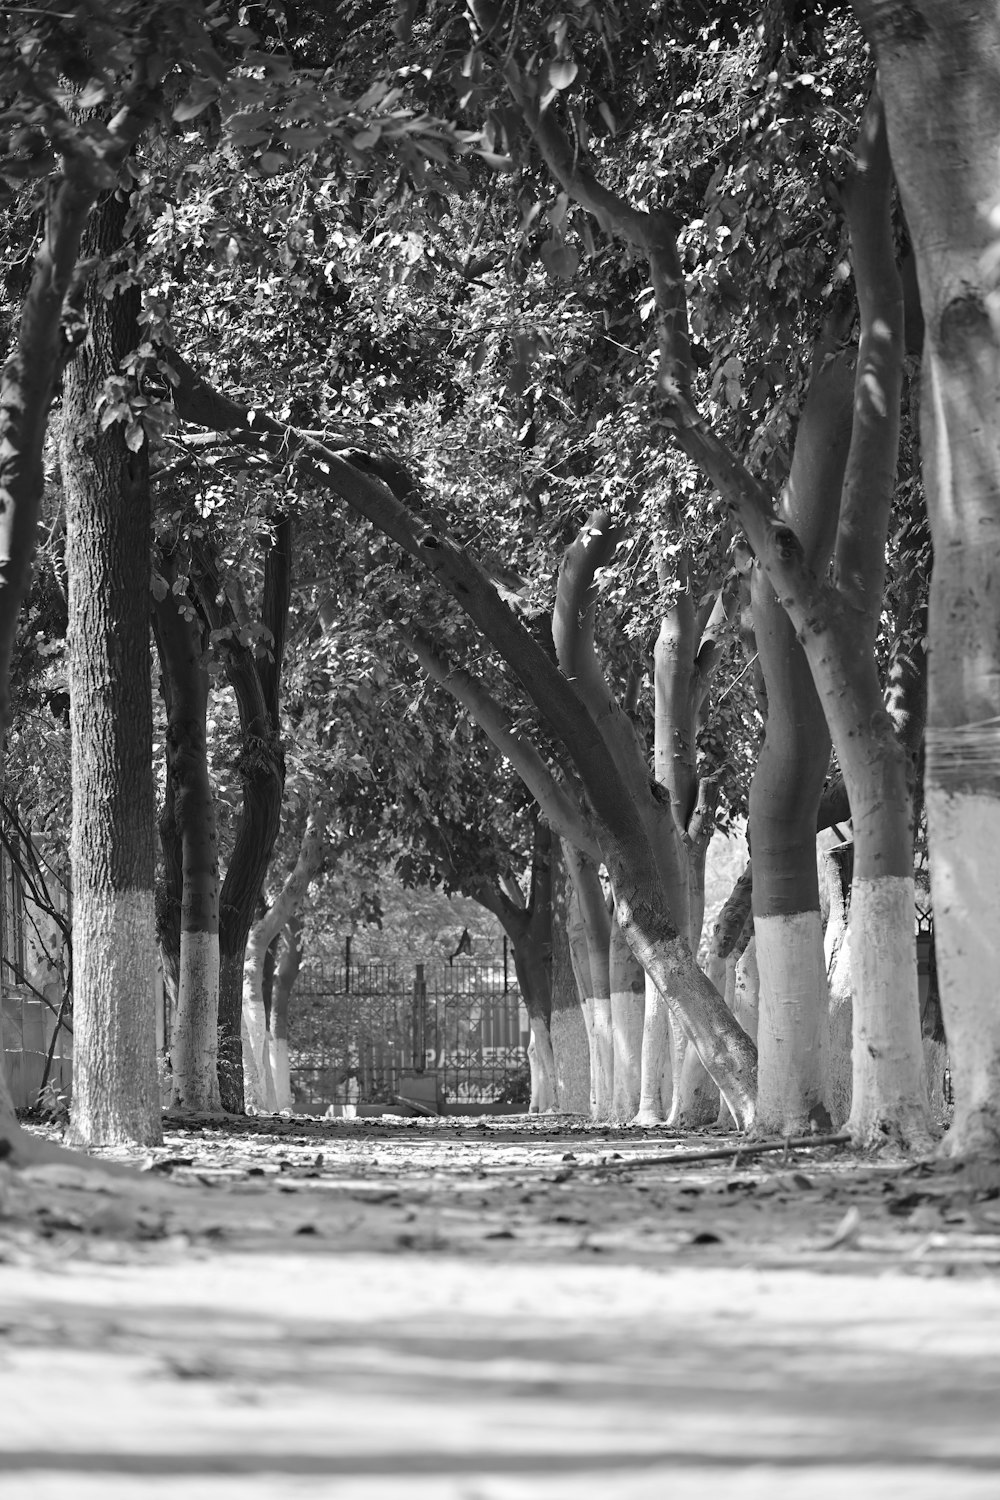 a black and white photo of a tree lined street